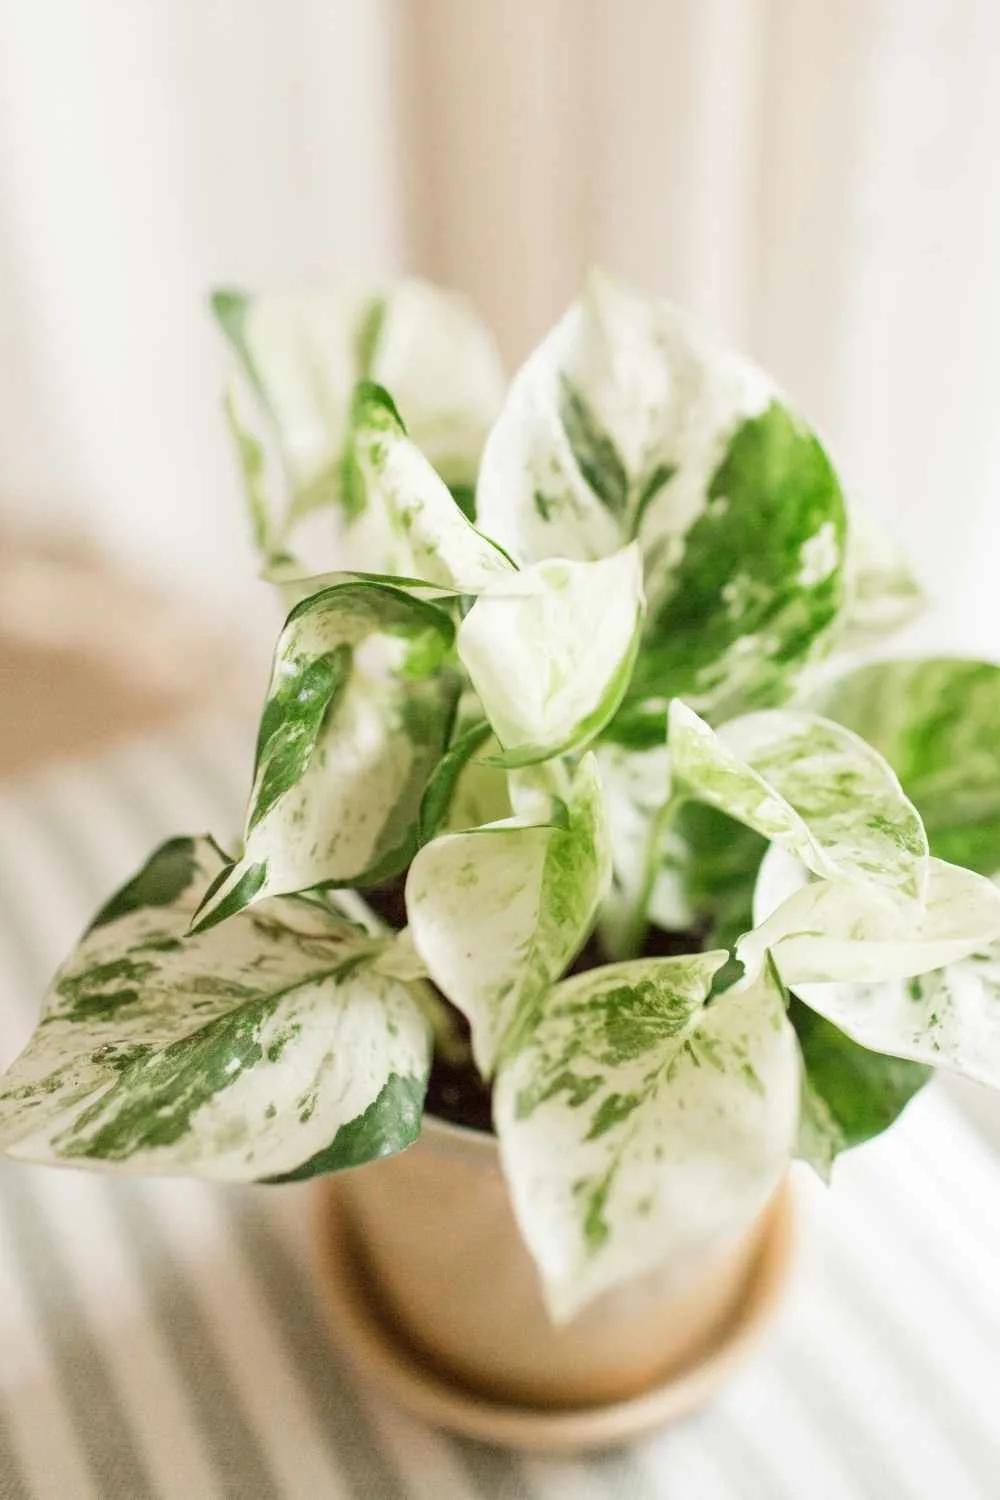 Pearls and Jade Pothos potted